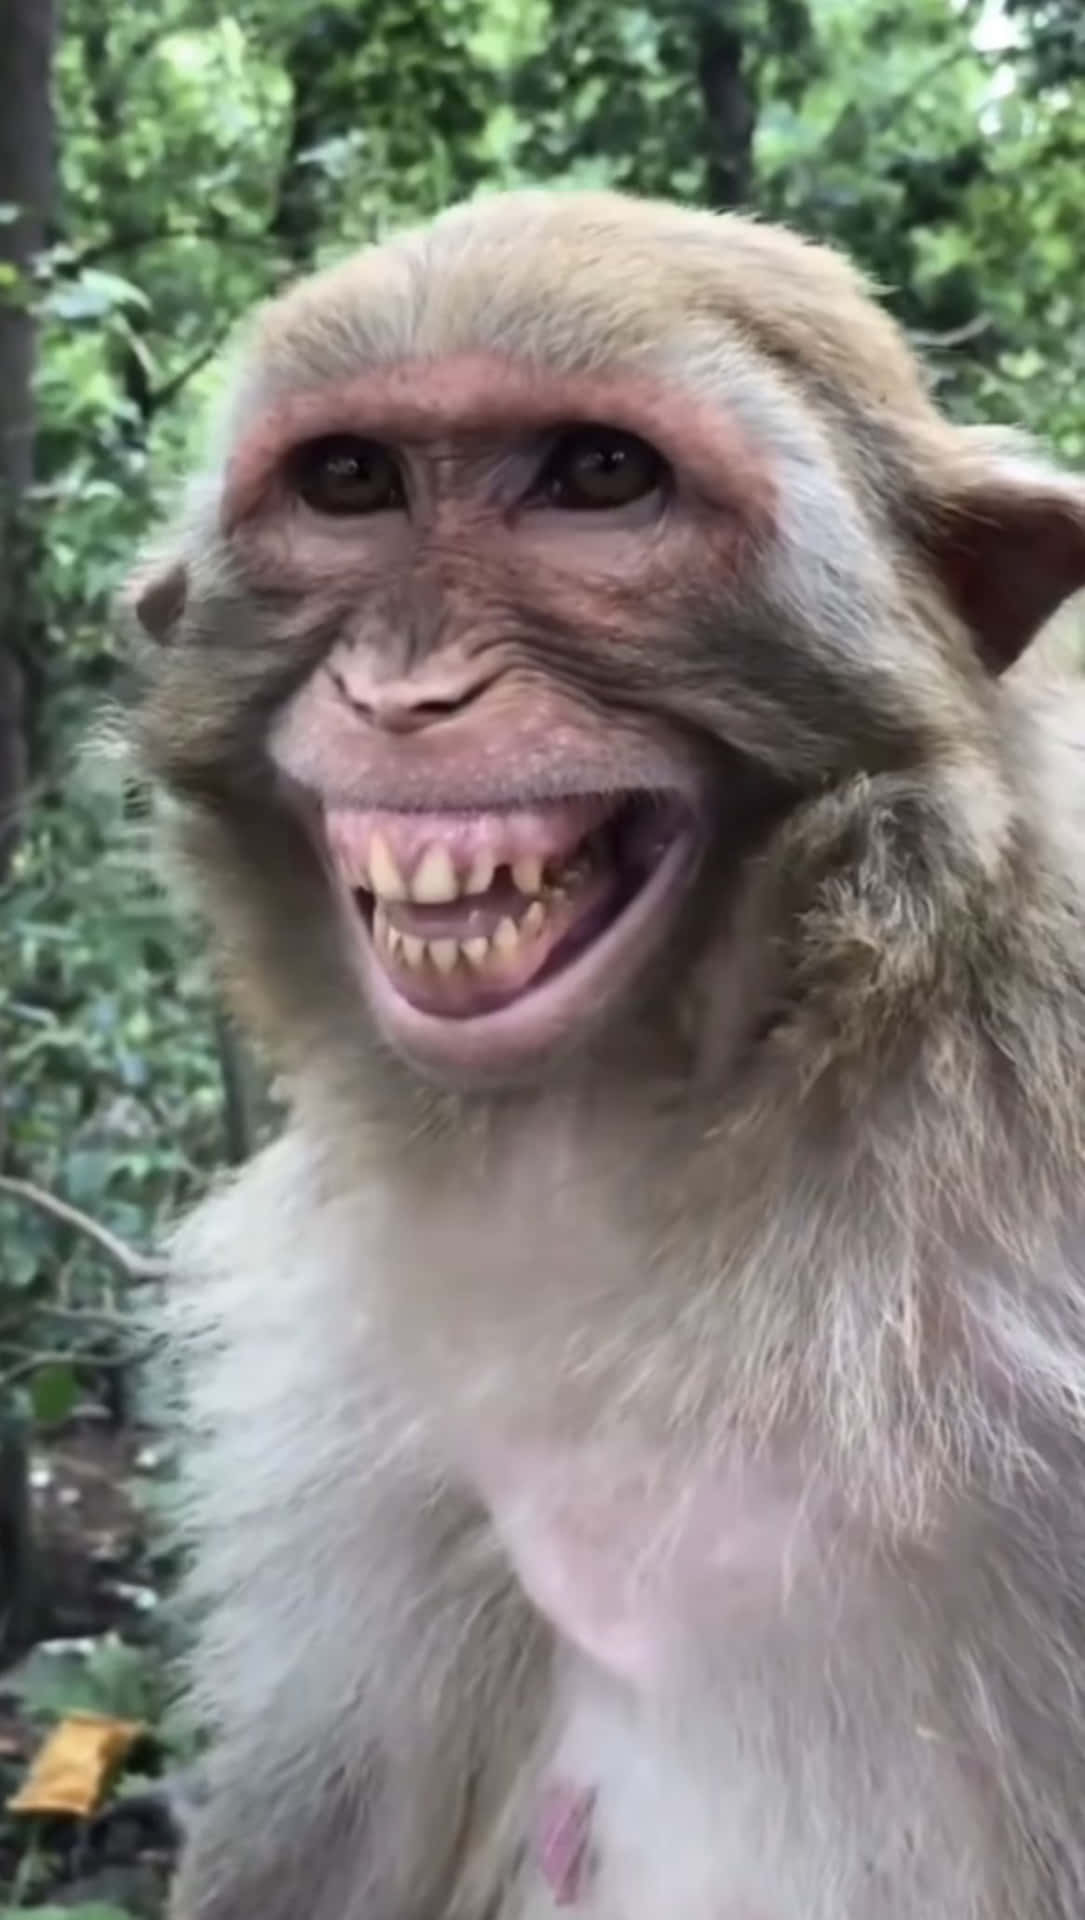 Take a break and crack a smile with this funny monkey!